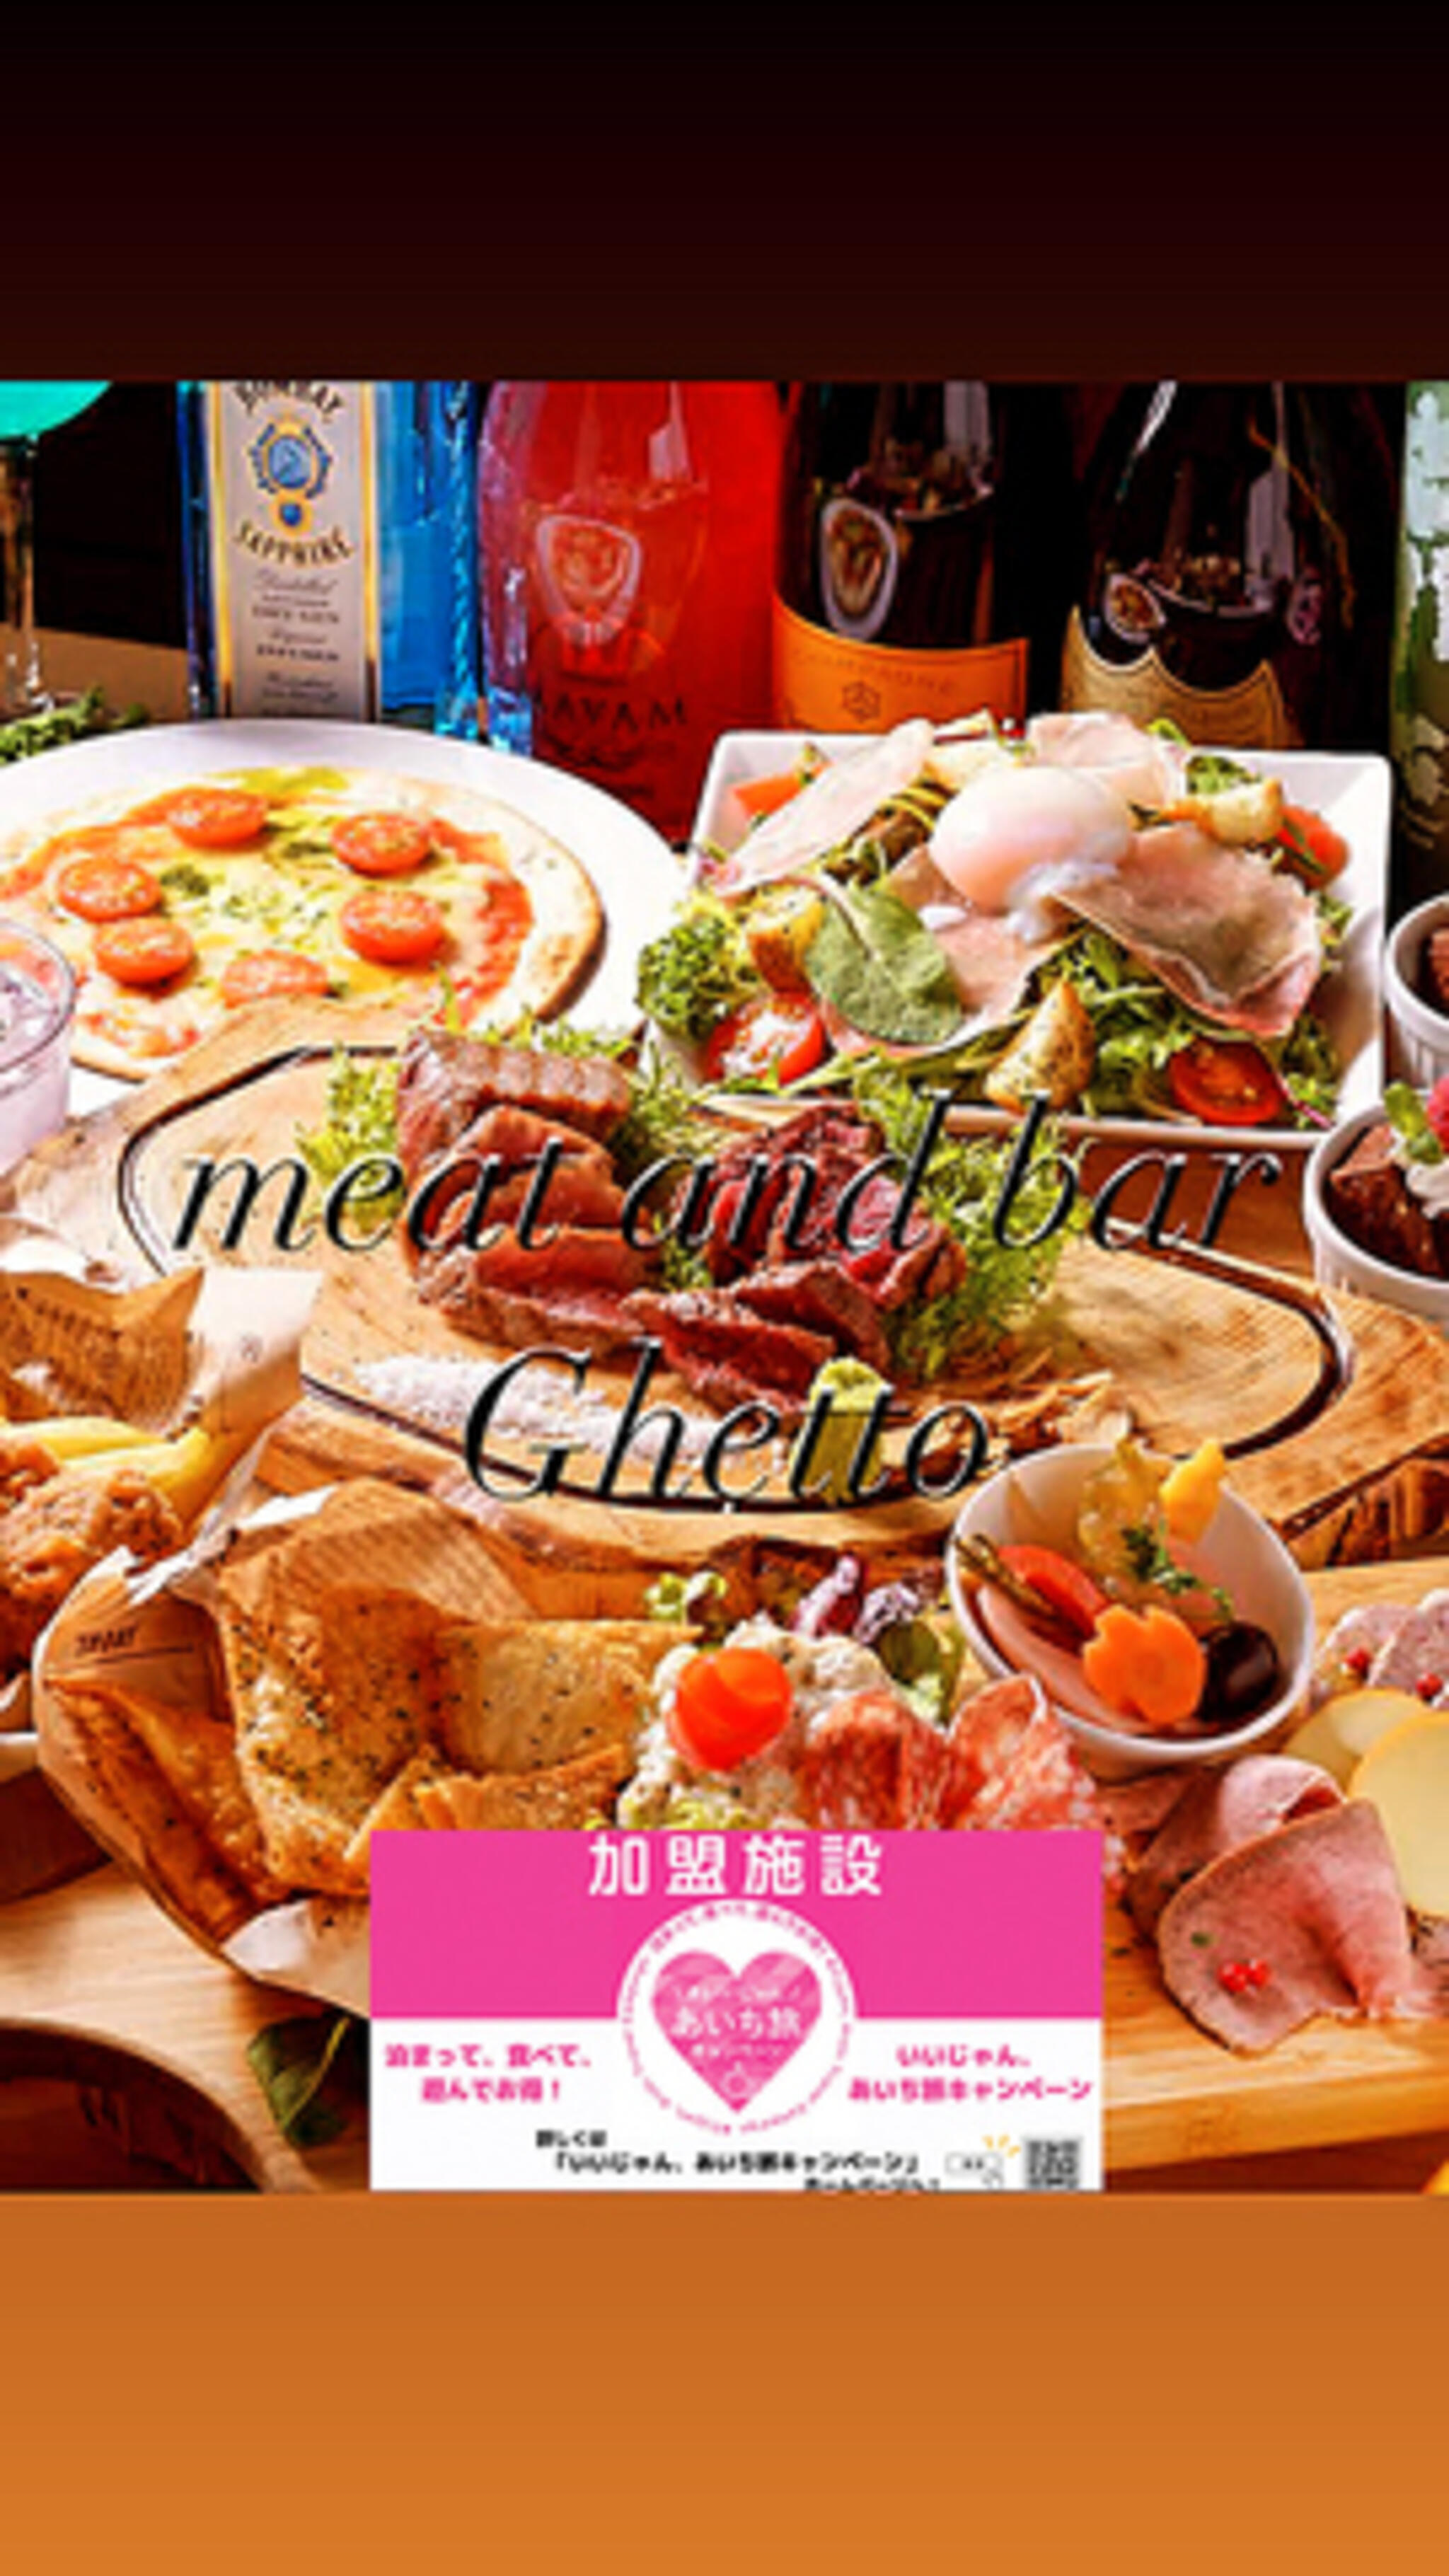 meat and bar Ghettoの代表写真2